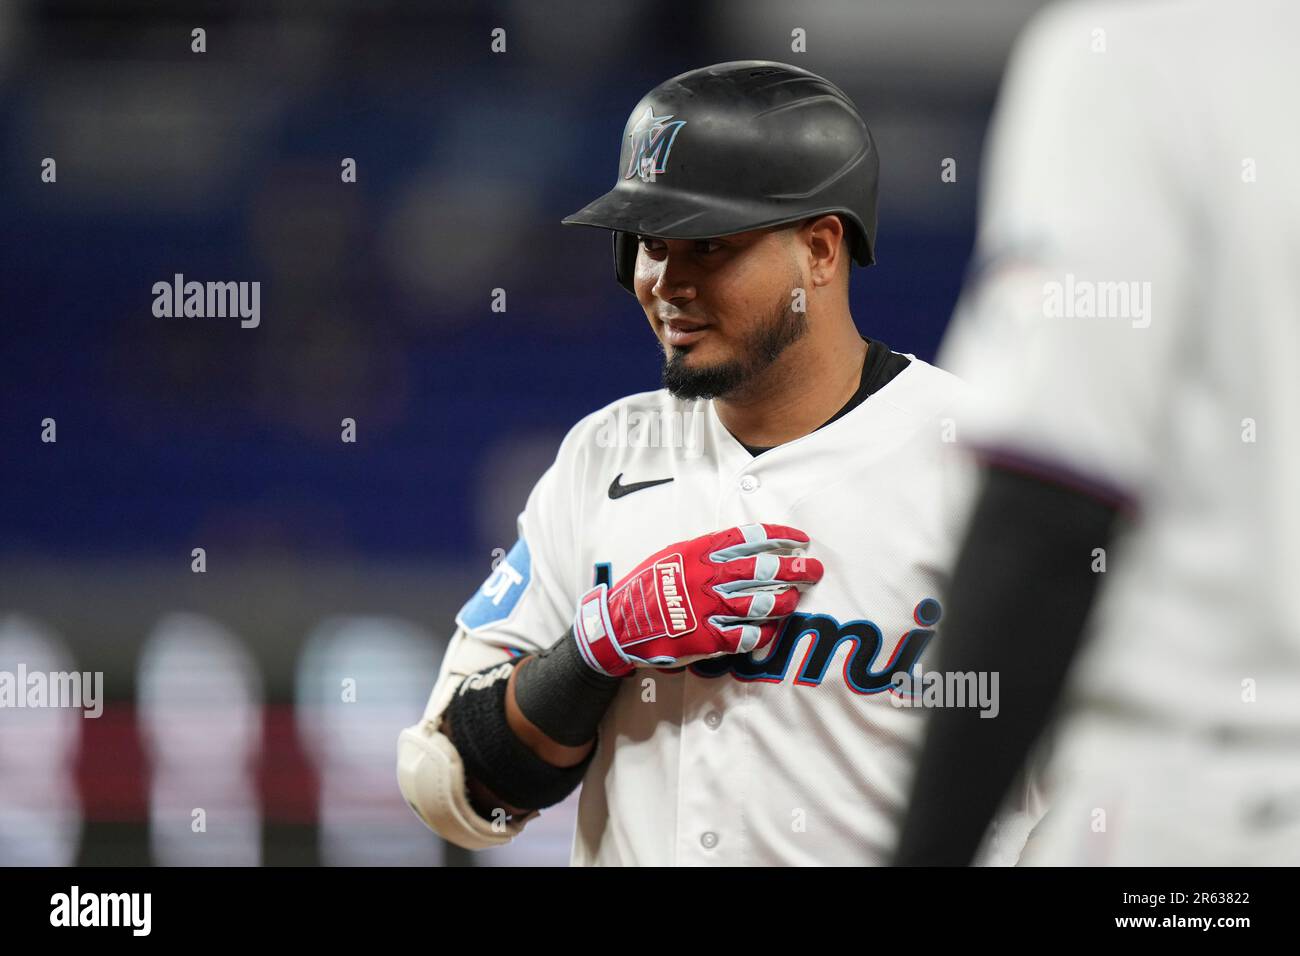 MIAMI, FL - JUNE 06: Miami Marlins second baseman Luis Arraez (3) smiles  after his second hit of the game during the game between the Kansas City  Royals and the Miami Marlins